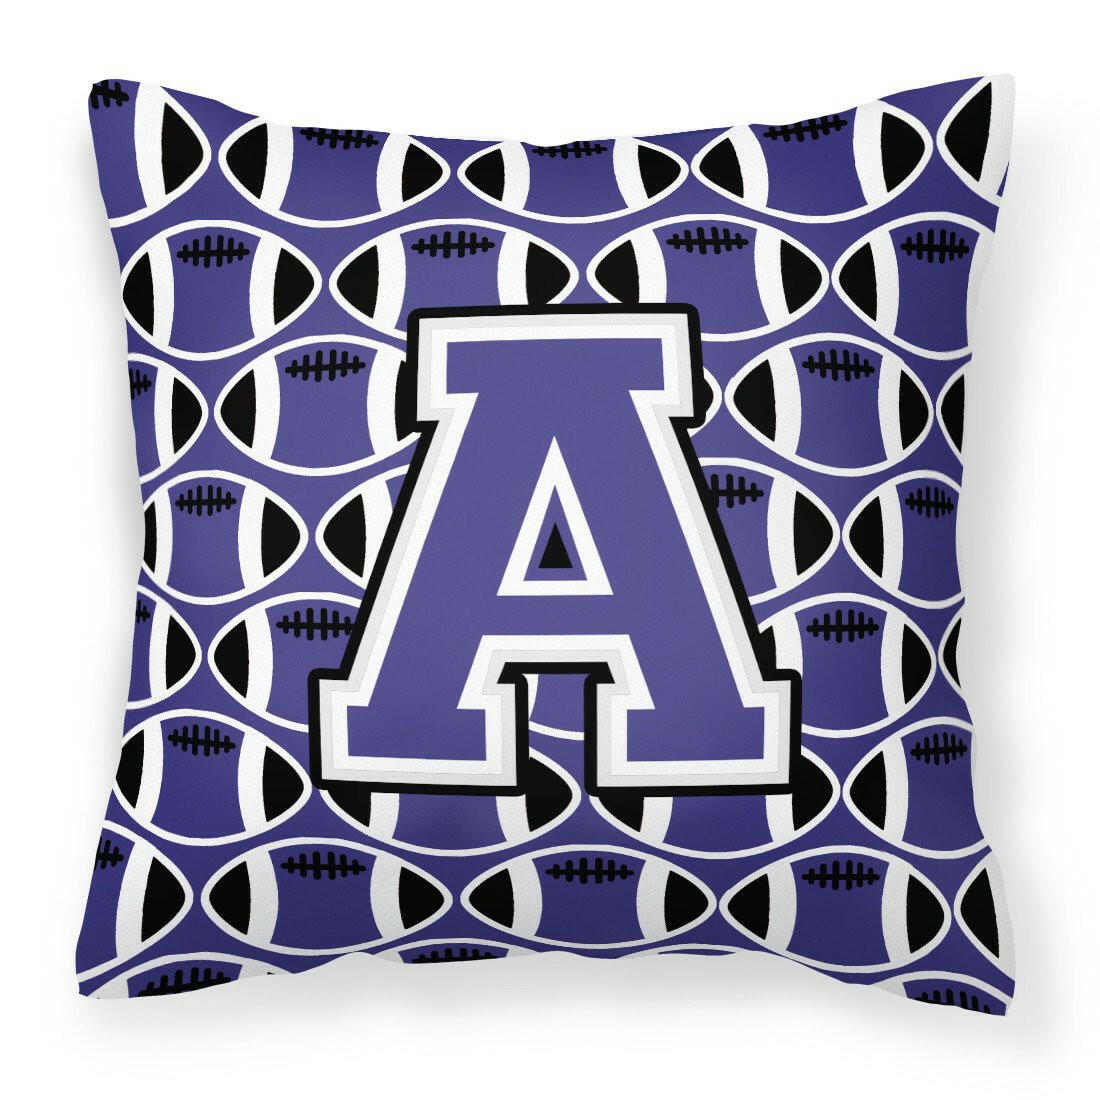 Letter A Football Purple and White Fabric Decorative Pillow CJ1068-APW1414 by Caroline's Treasures